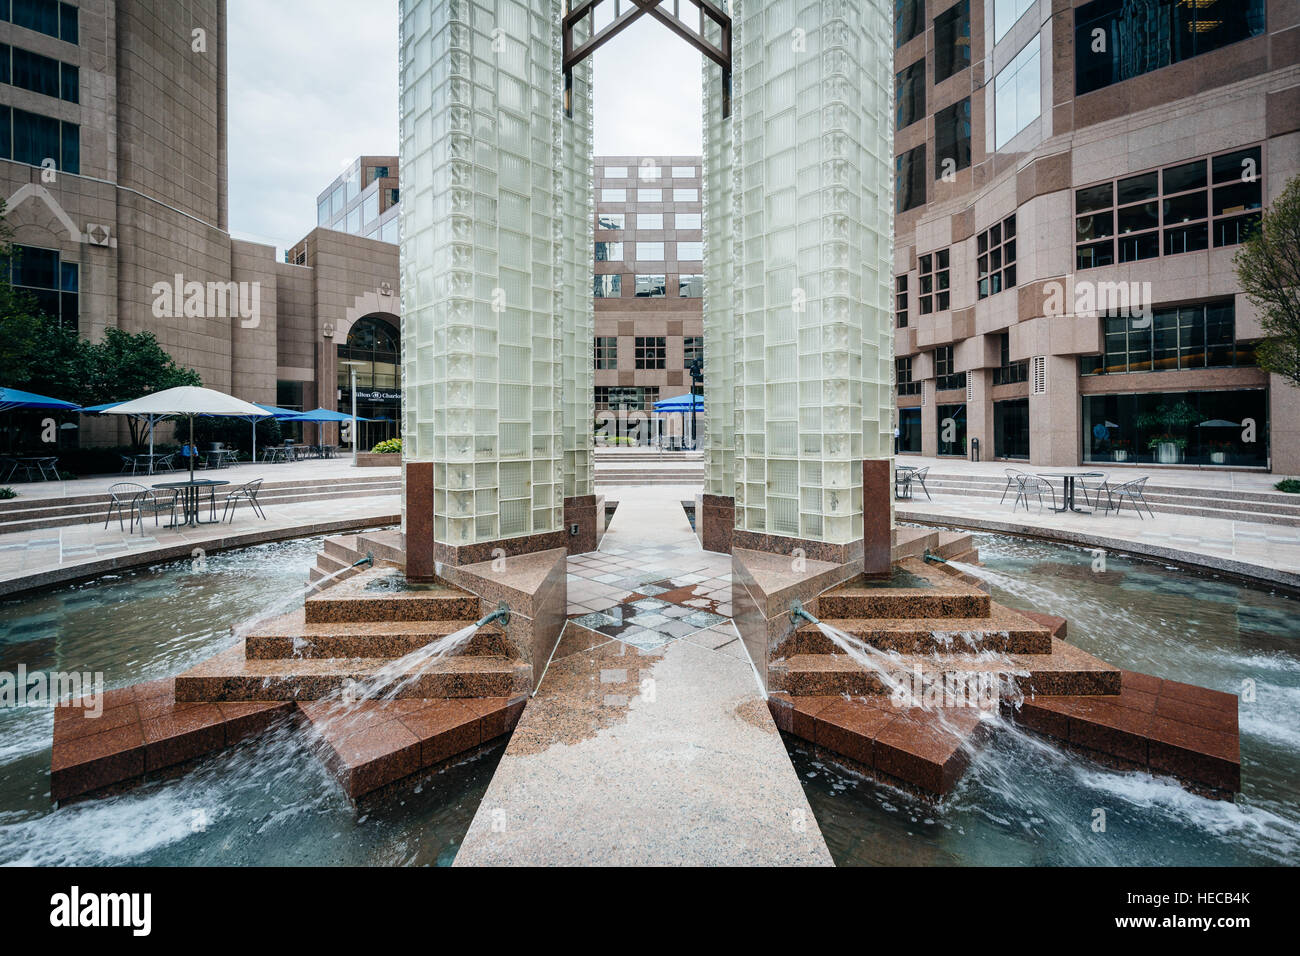 Fountains and park in Uptown Charlotte, North Carolina. Stock Photo